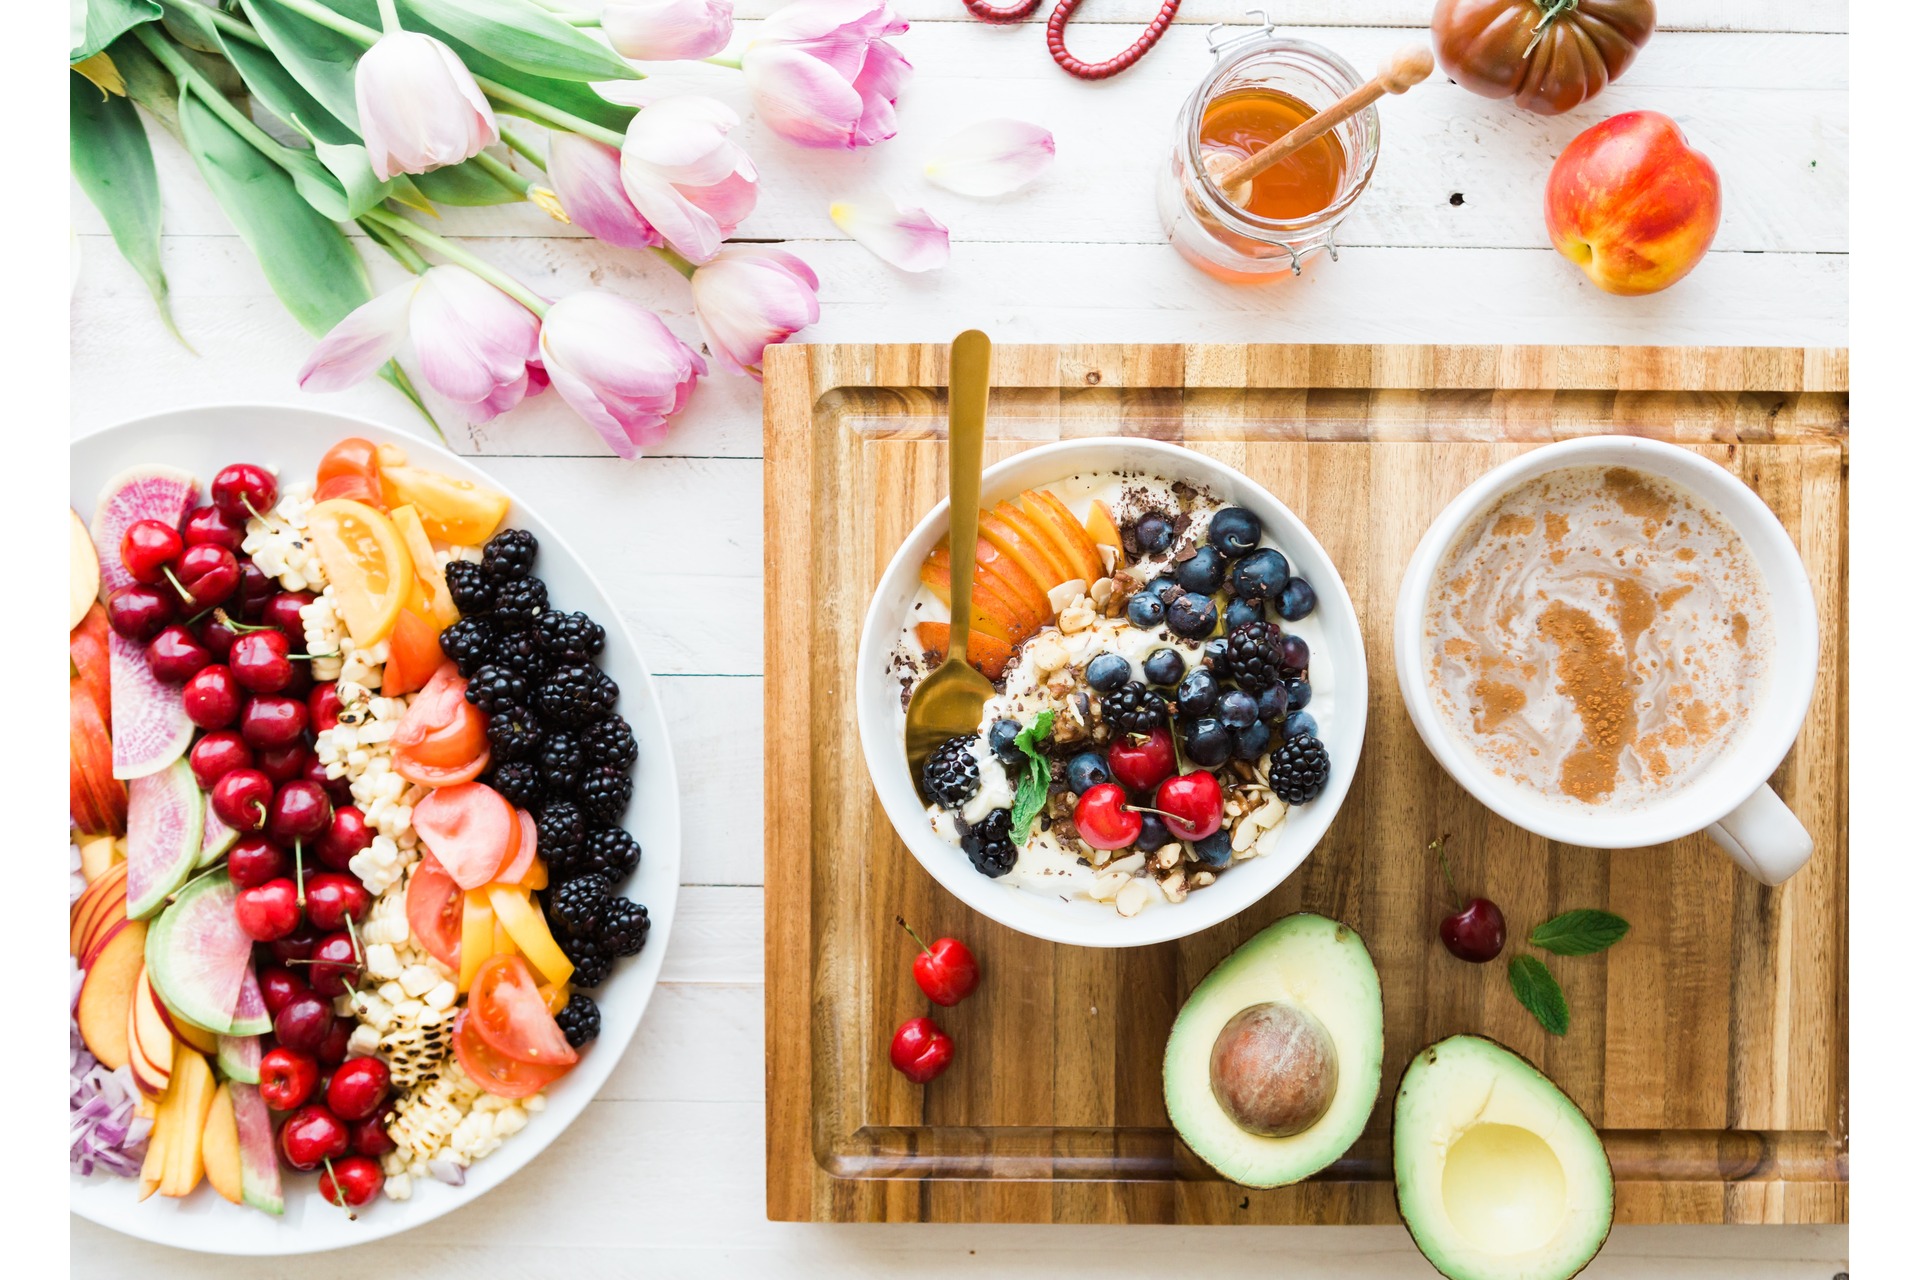 breakfast ideas without eggs - a bowl of oats topped with fruits and fruit platter